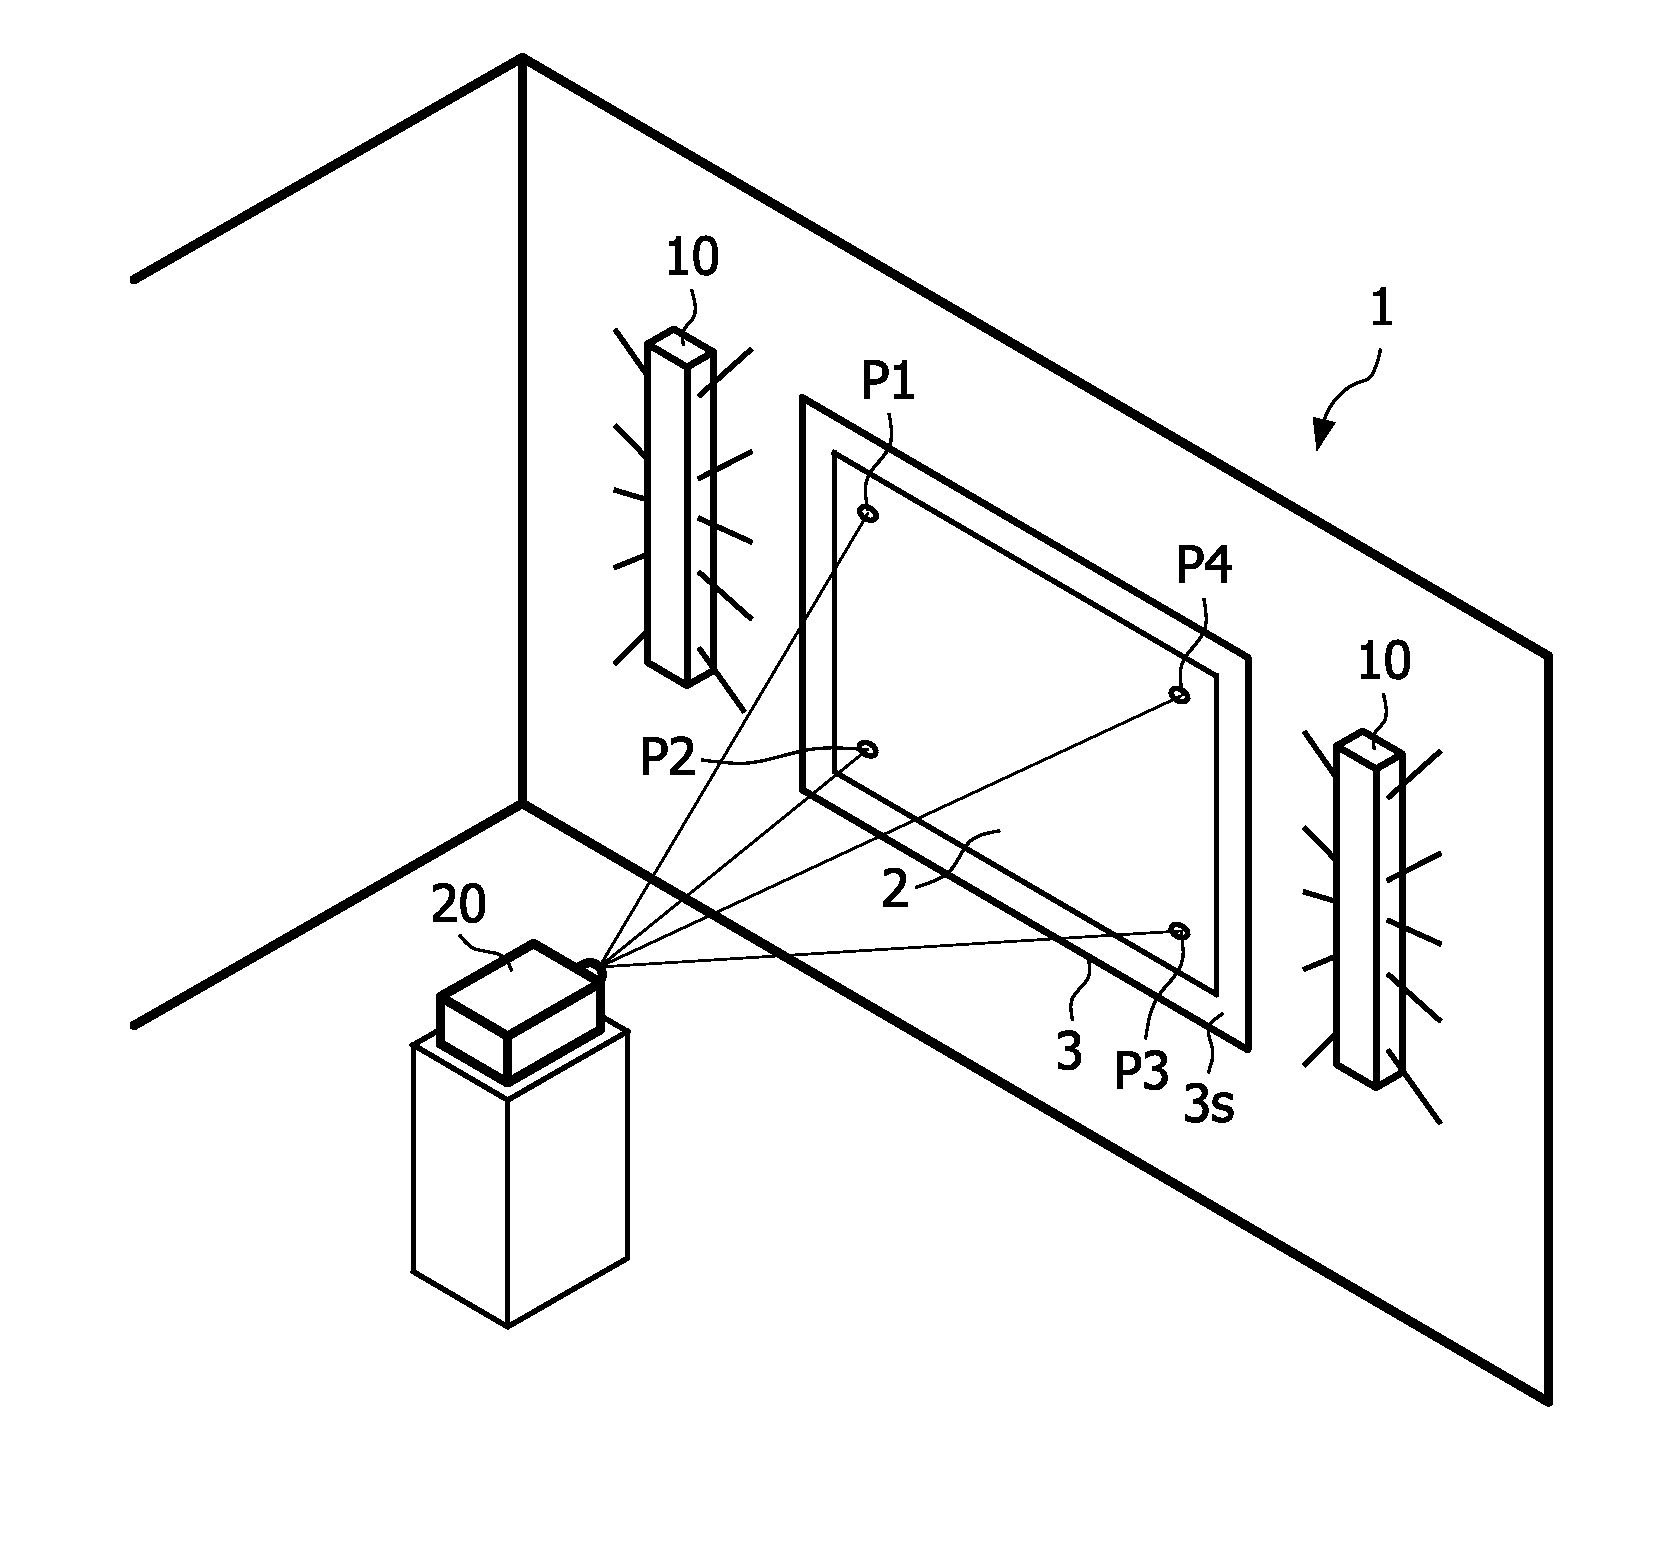 Method of controlling the lighting of a room in accordance with an image projected onto a projection surface